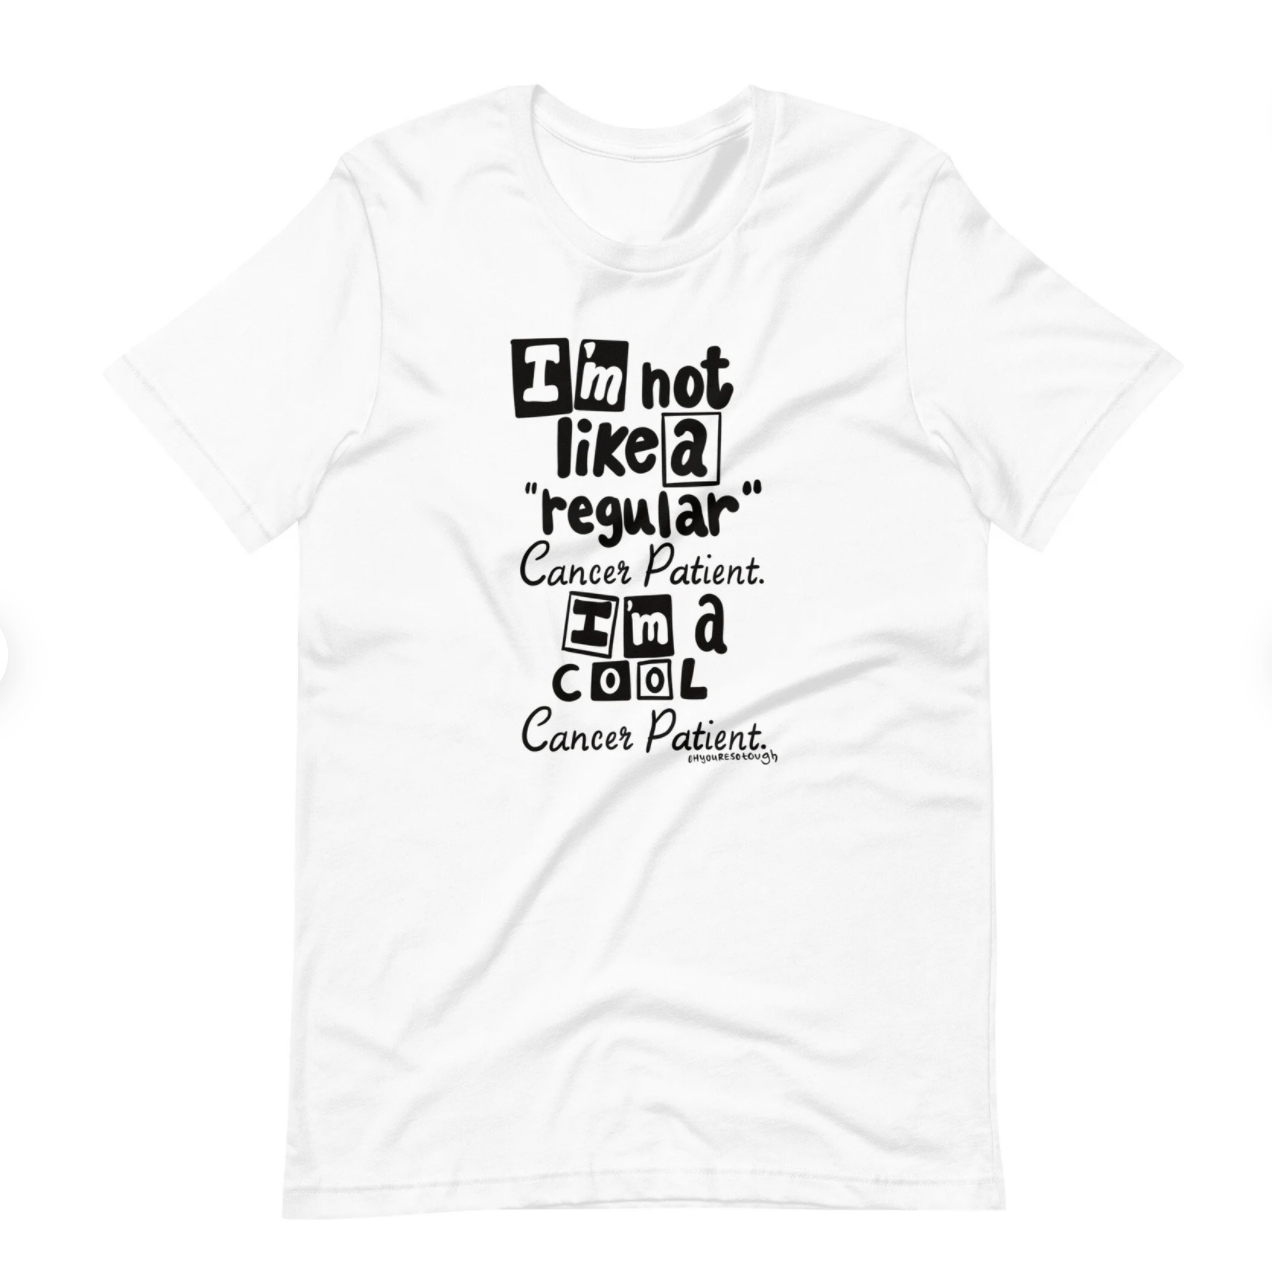 Cancer Patient Shirt Funny - I'm a Cool Cancer Patient - Funny Cancer Shirt - Cancer Support Shirt - Chemo Shirt - End of Chemo Shirt